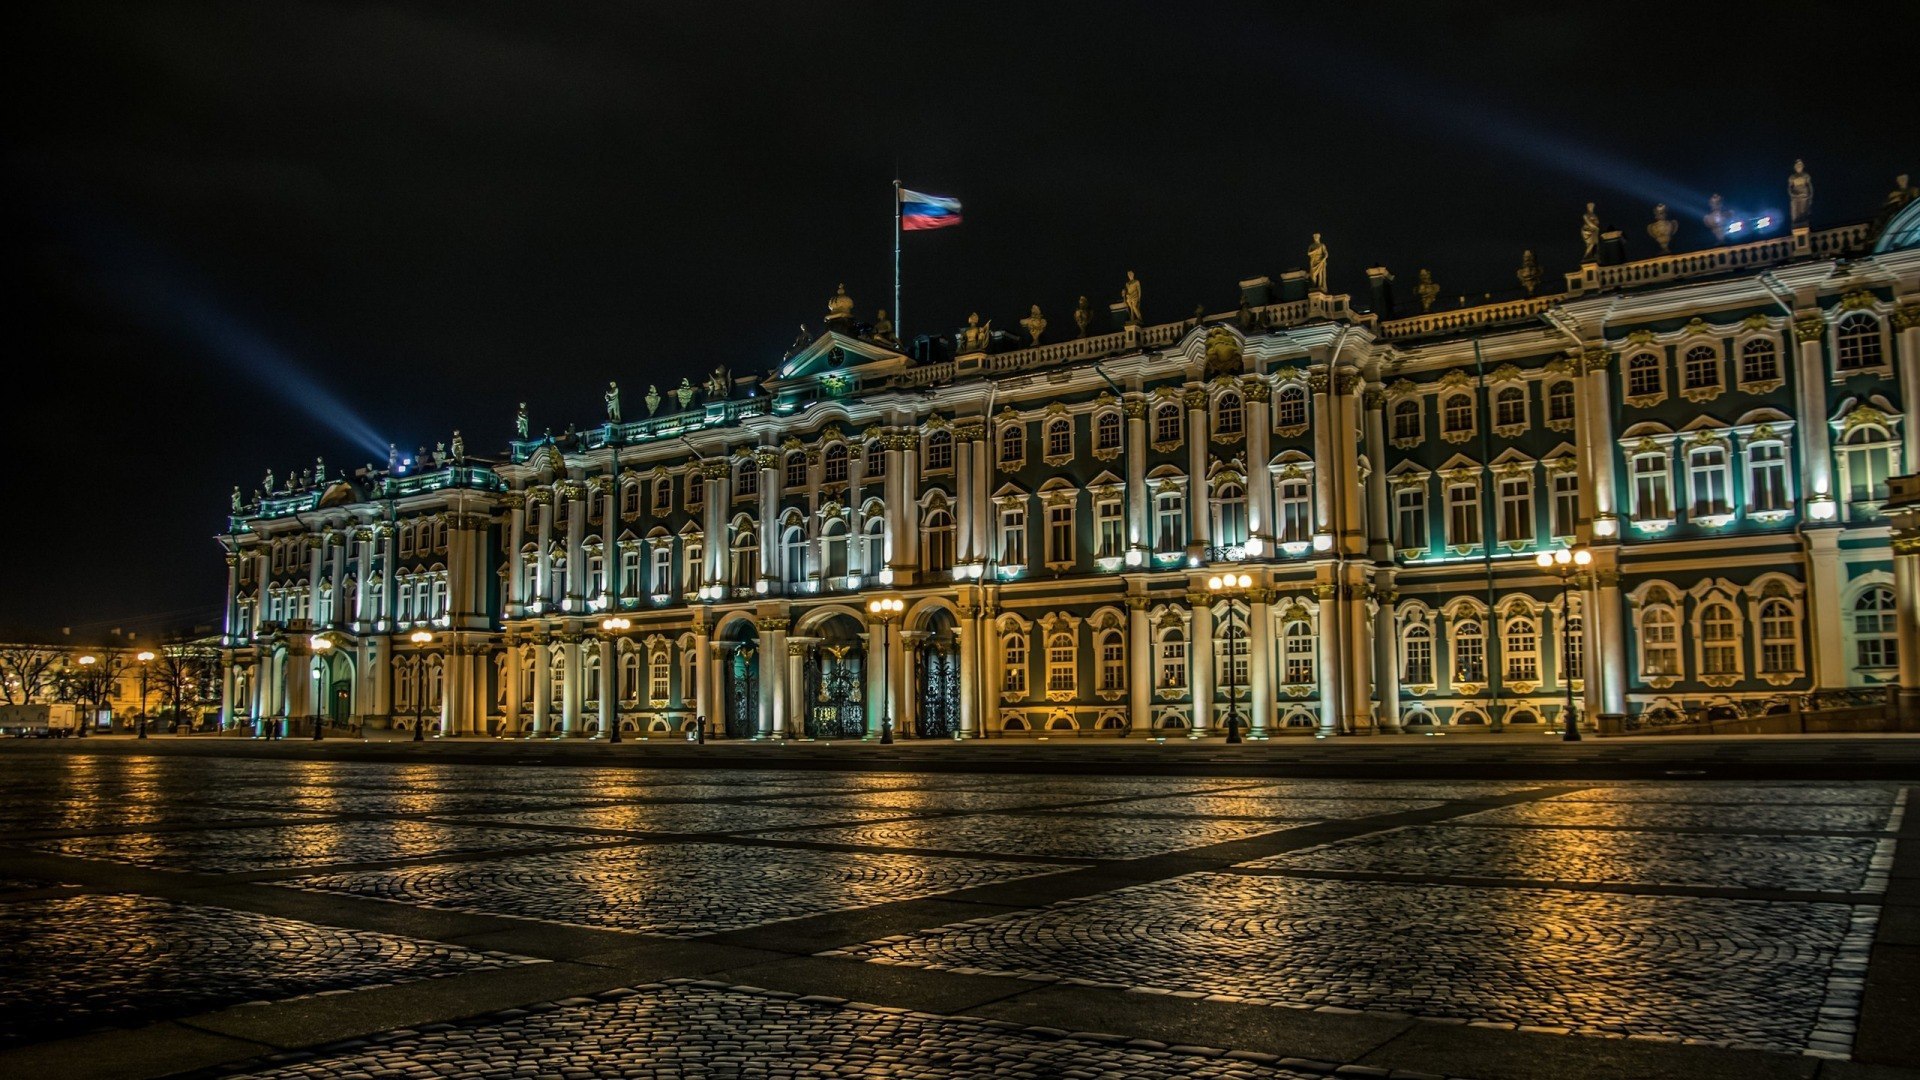 Image of the State Hermitage Museum, St. Petersburg, Russia